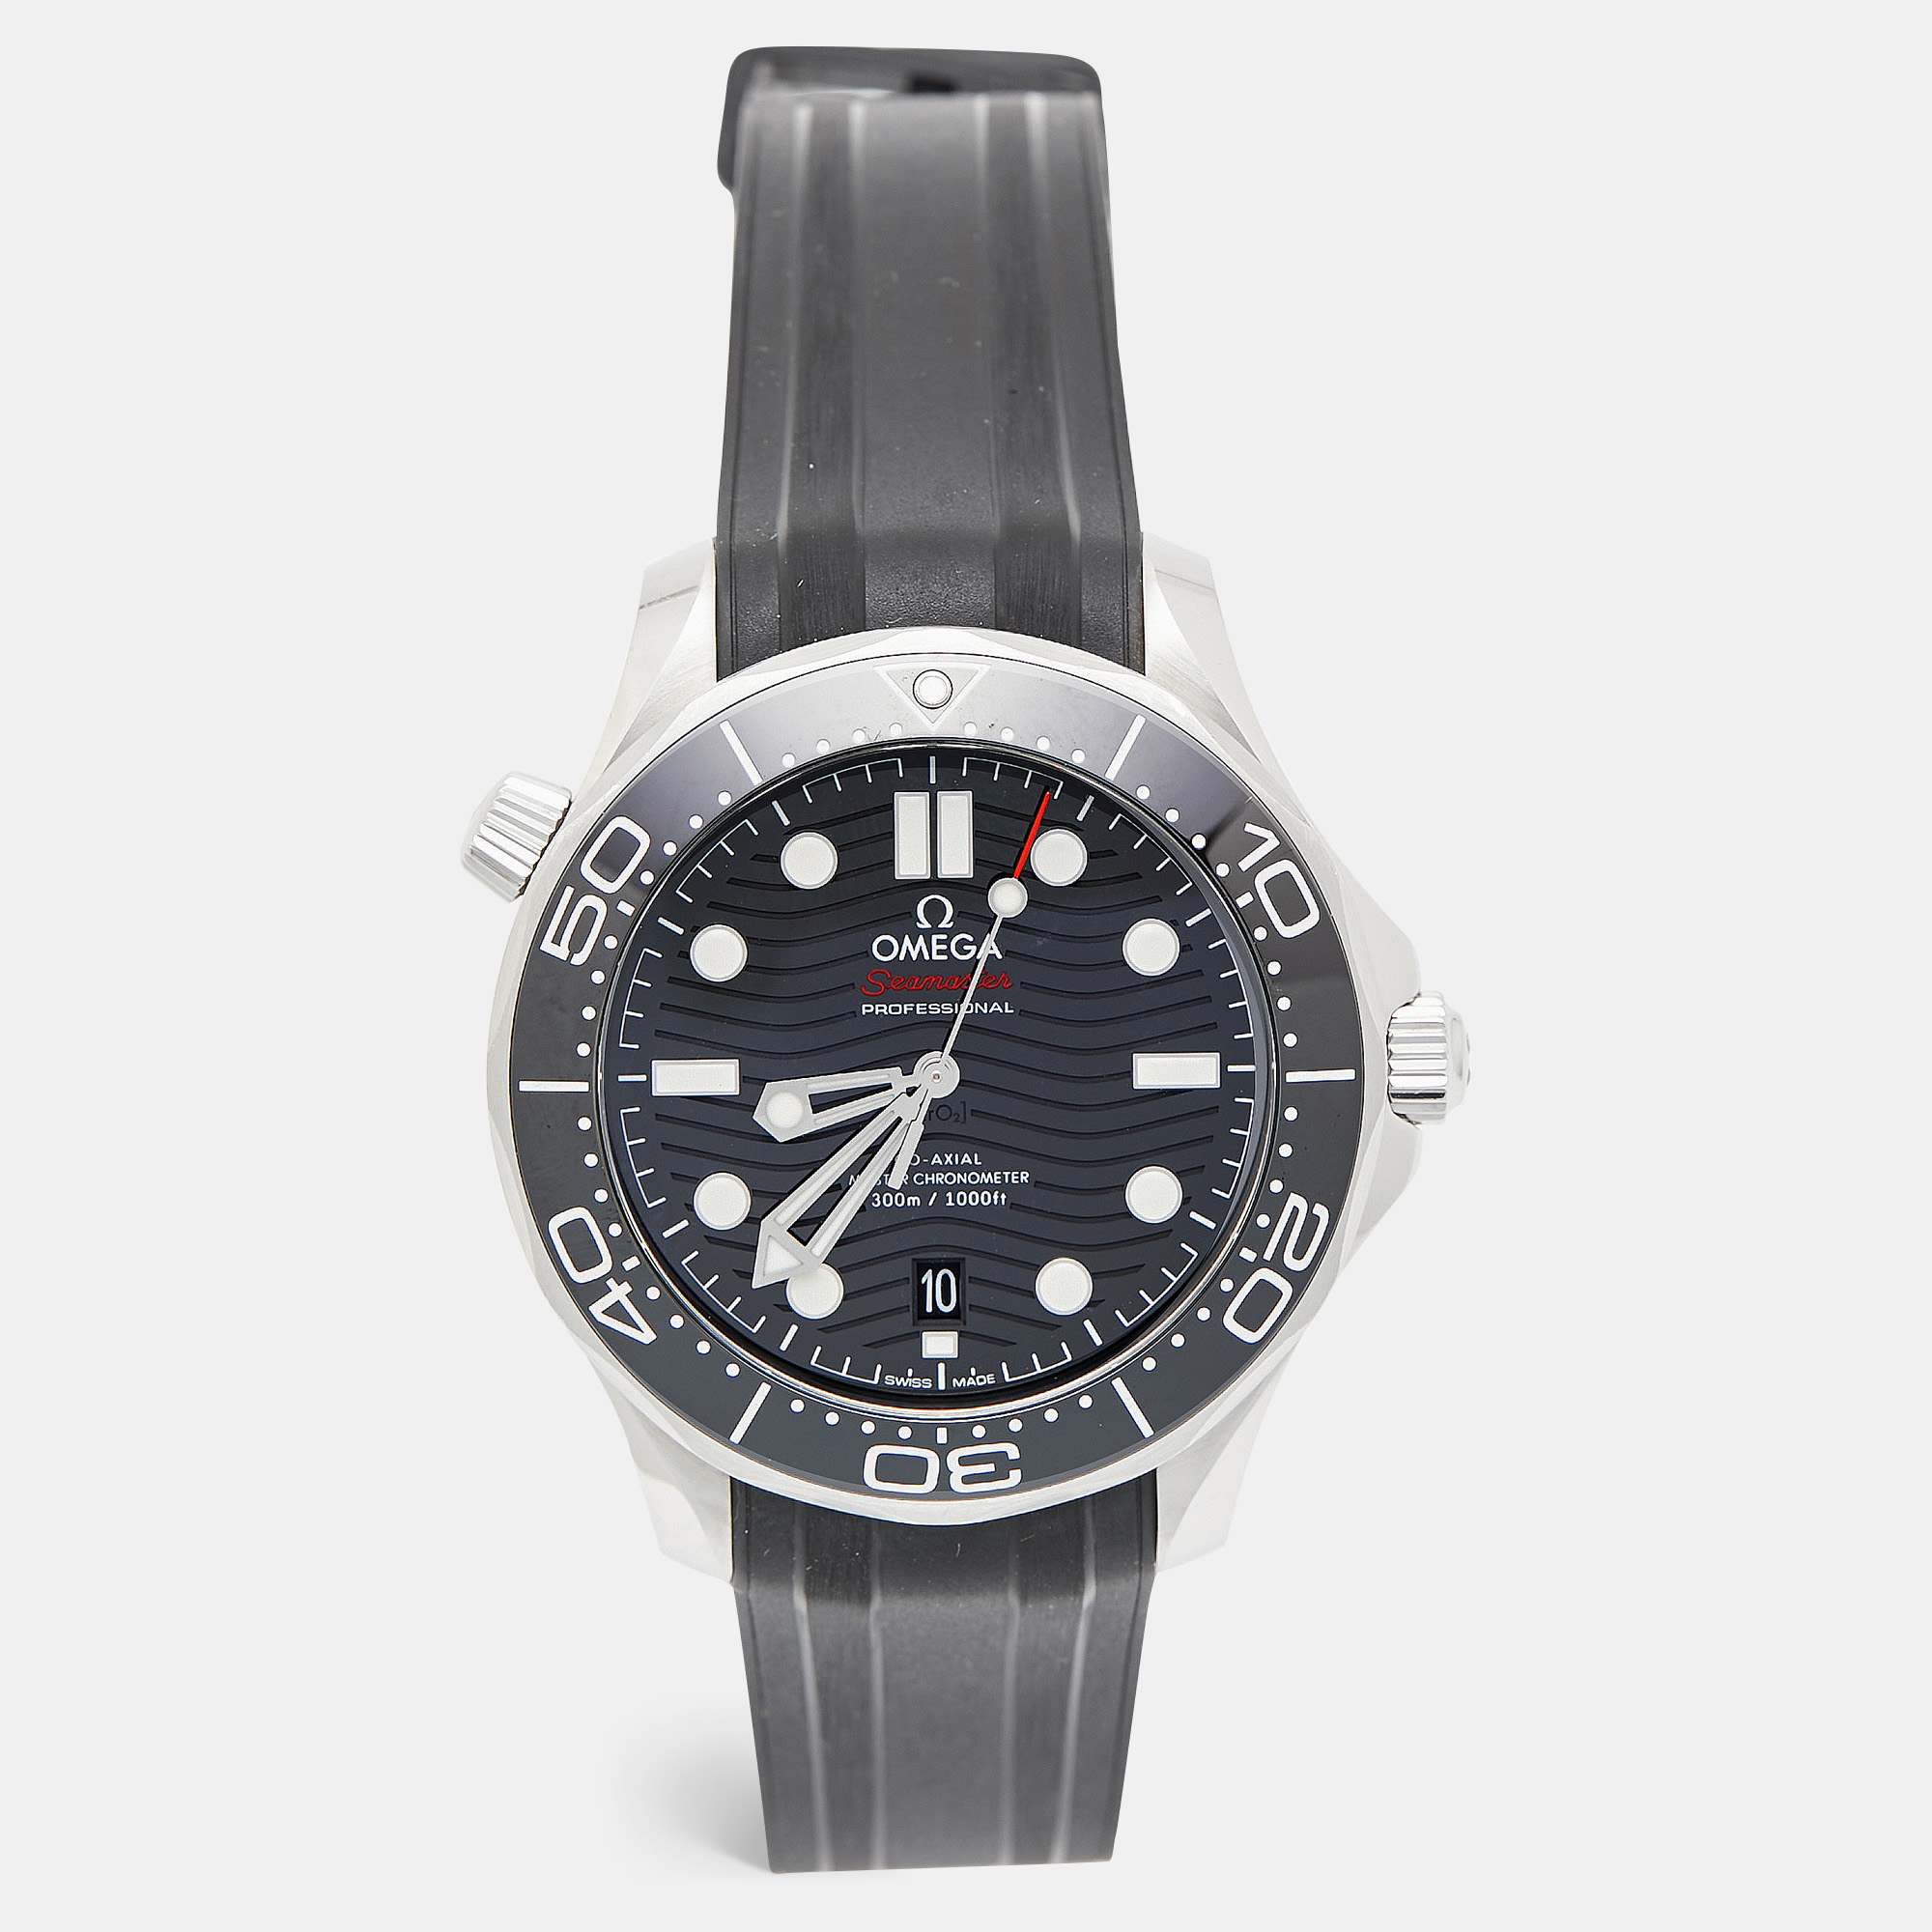 

Omega Black Ceramic Stainless Steel Rubber Seamaster Professional Diver